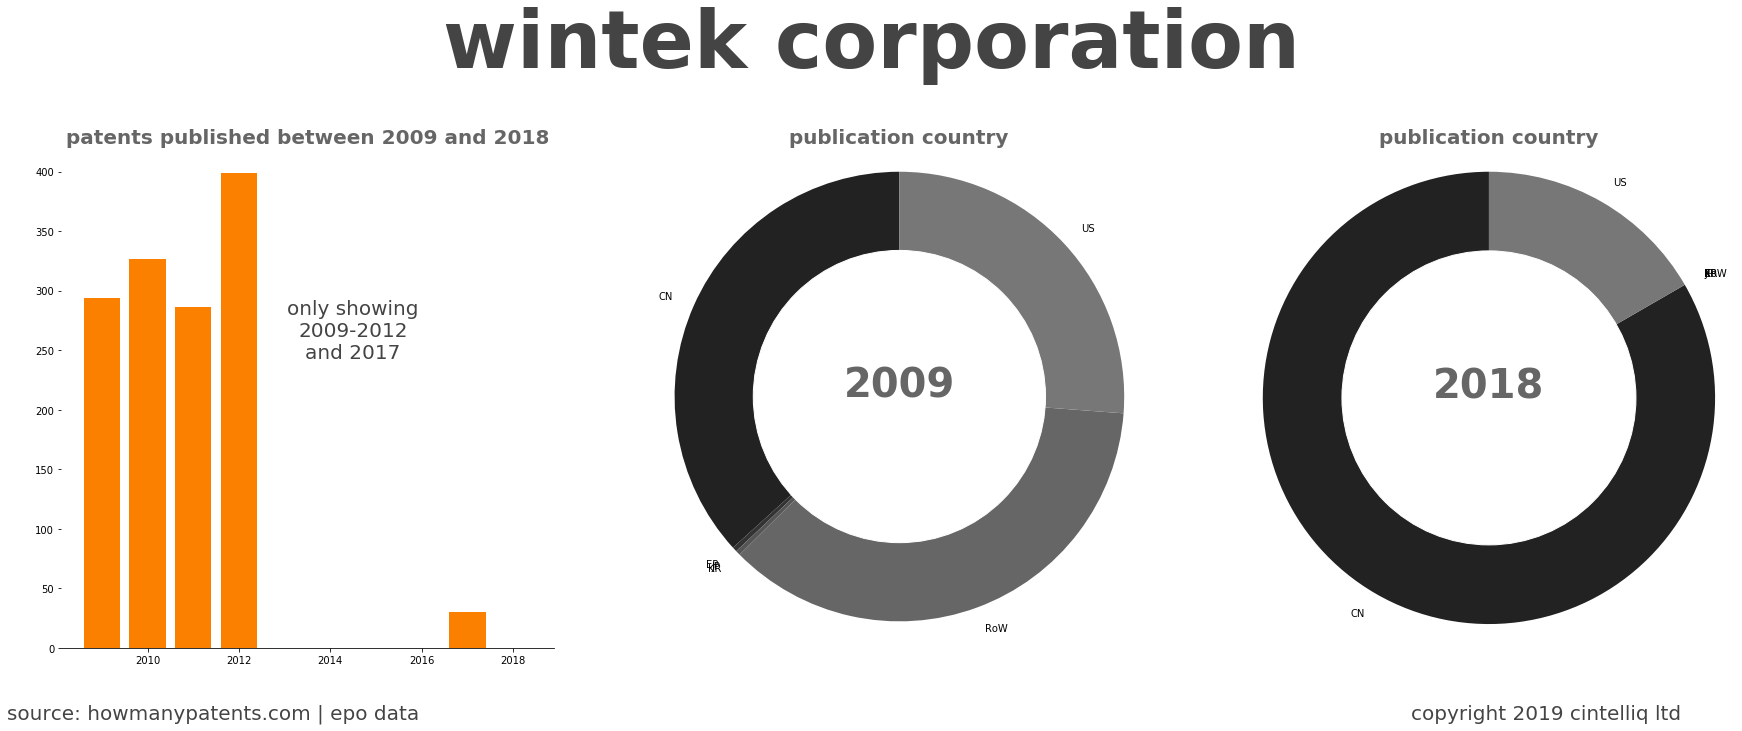 summary of patents for Wintek Corporation